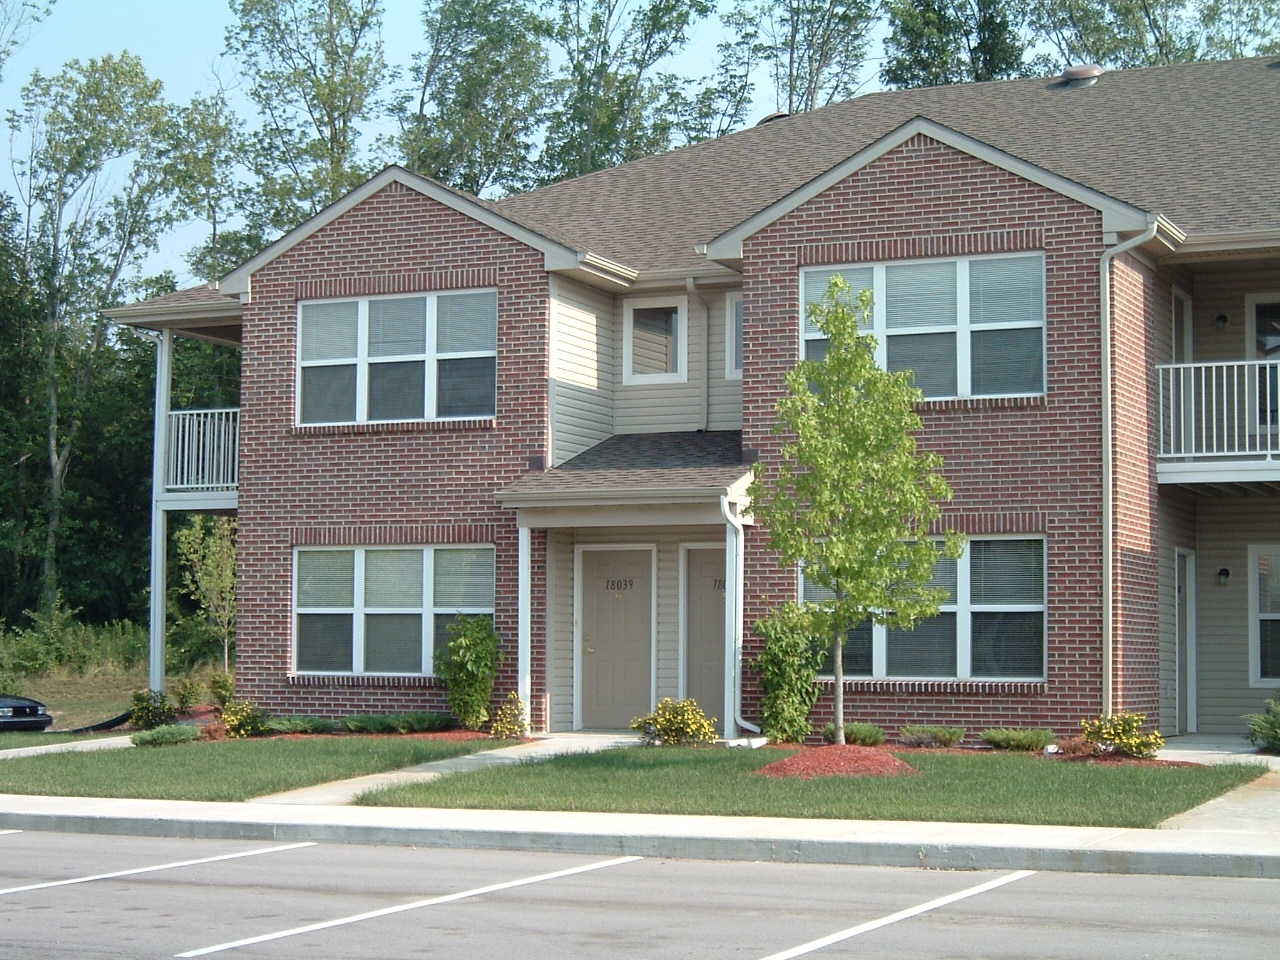 Photo of ASHTON PINES PHASE I. Affordable housing located at 4353 BALSAM FIR LN ELKHART, IN 46517